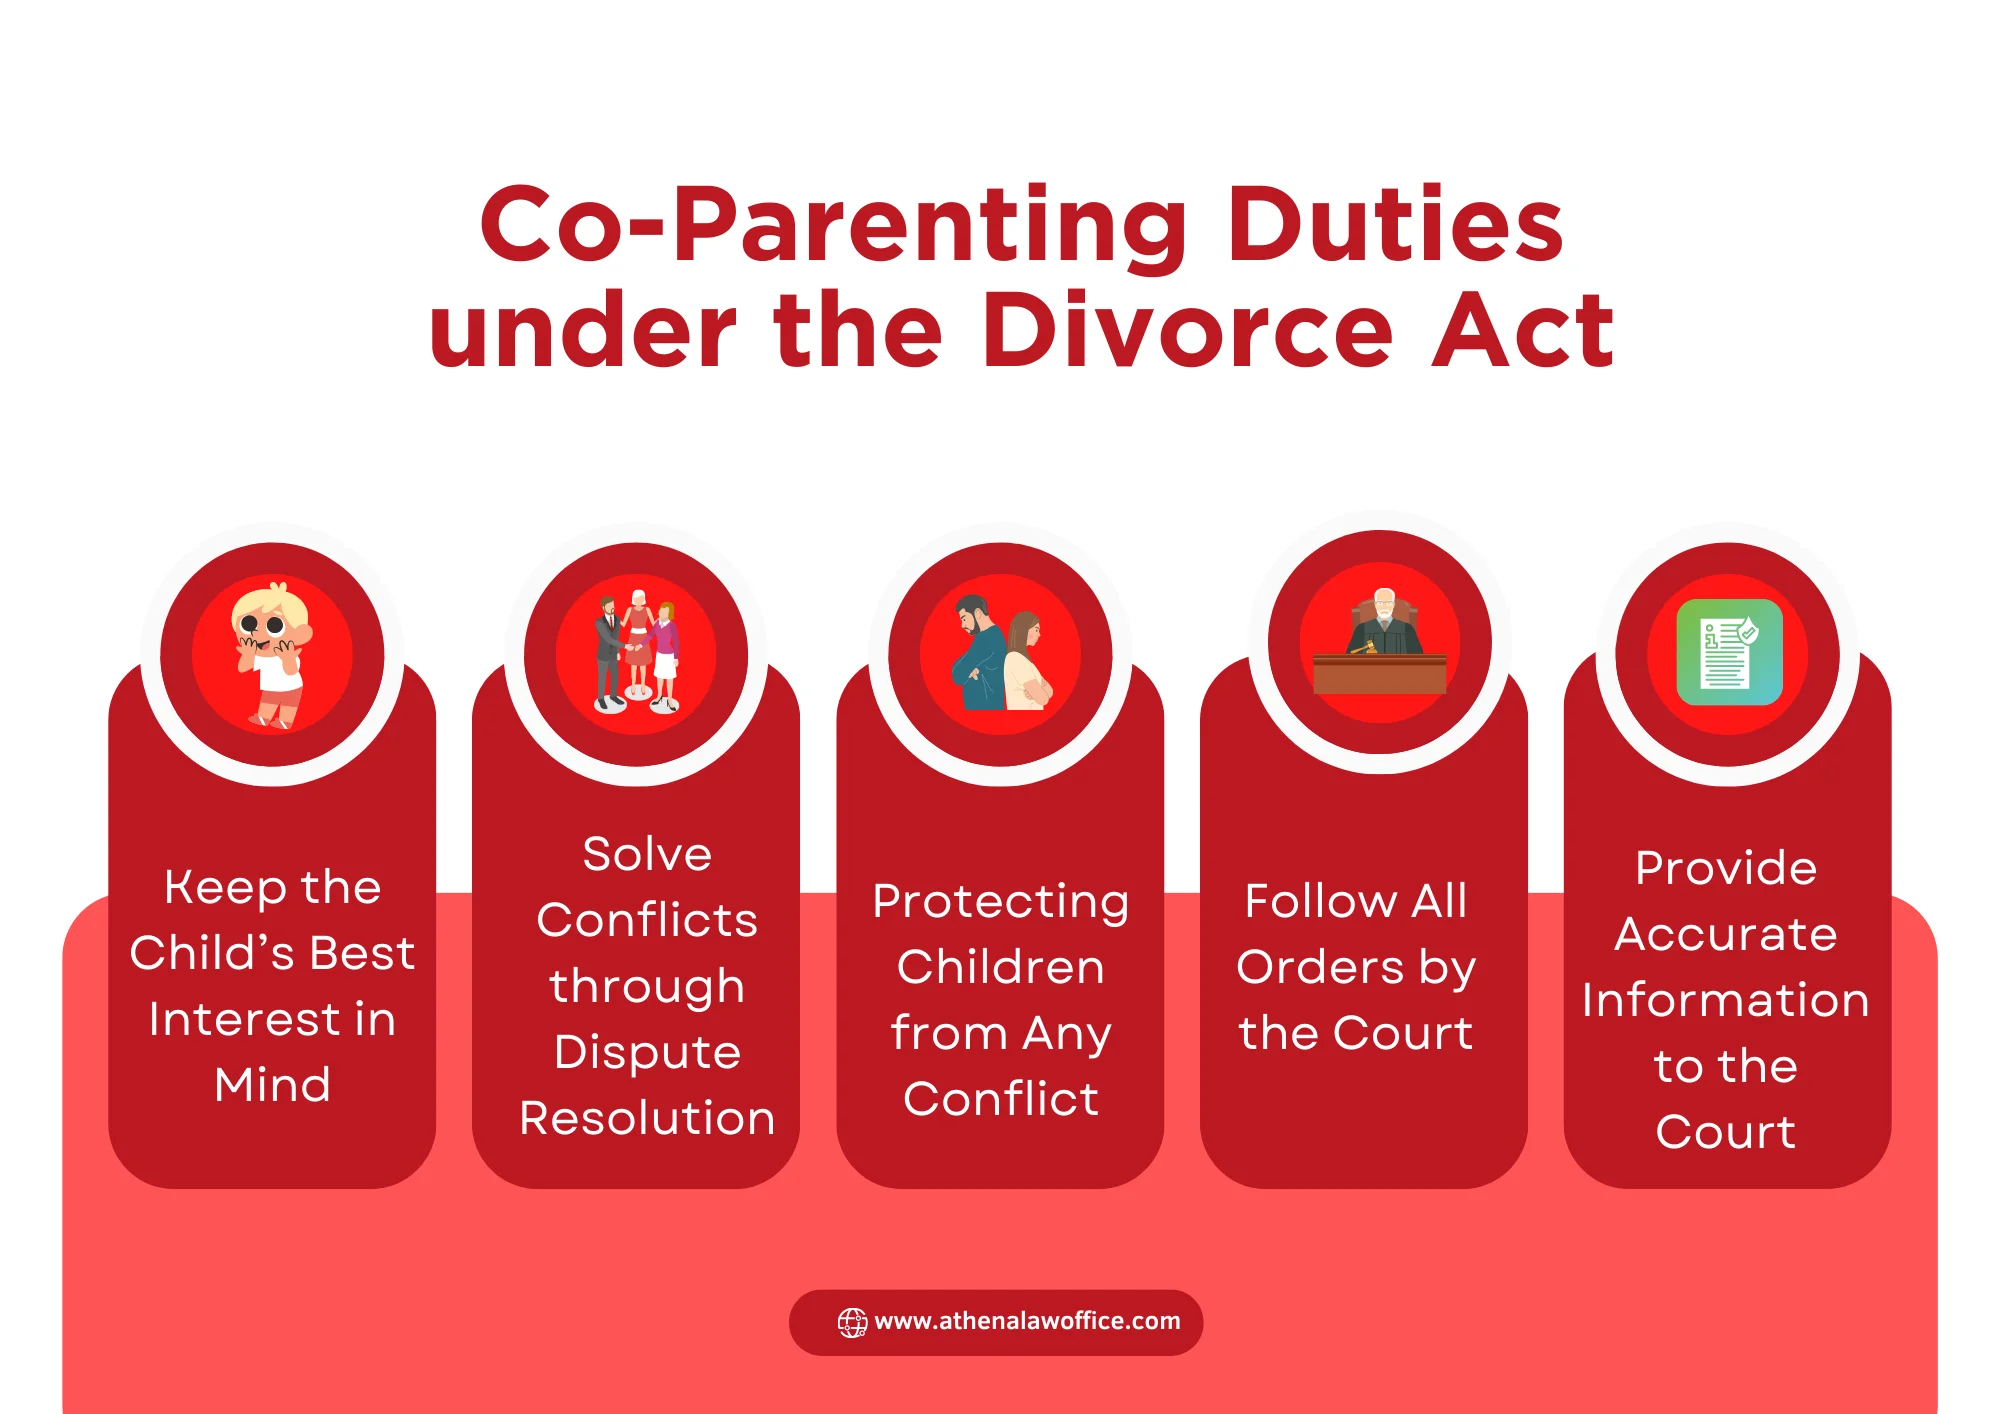 An infographic on co-parenting duties under the Divorce Act Canada